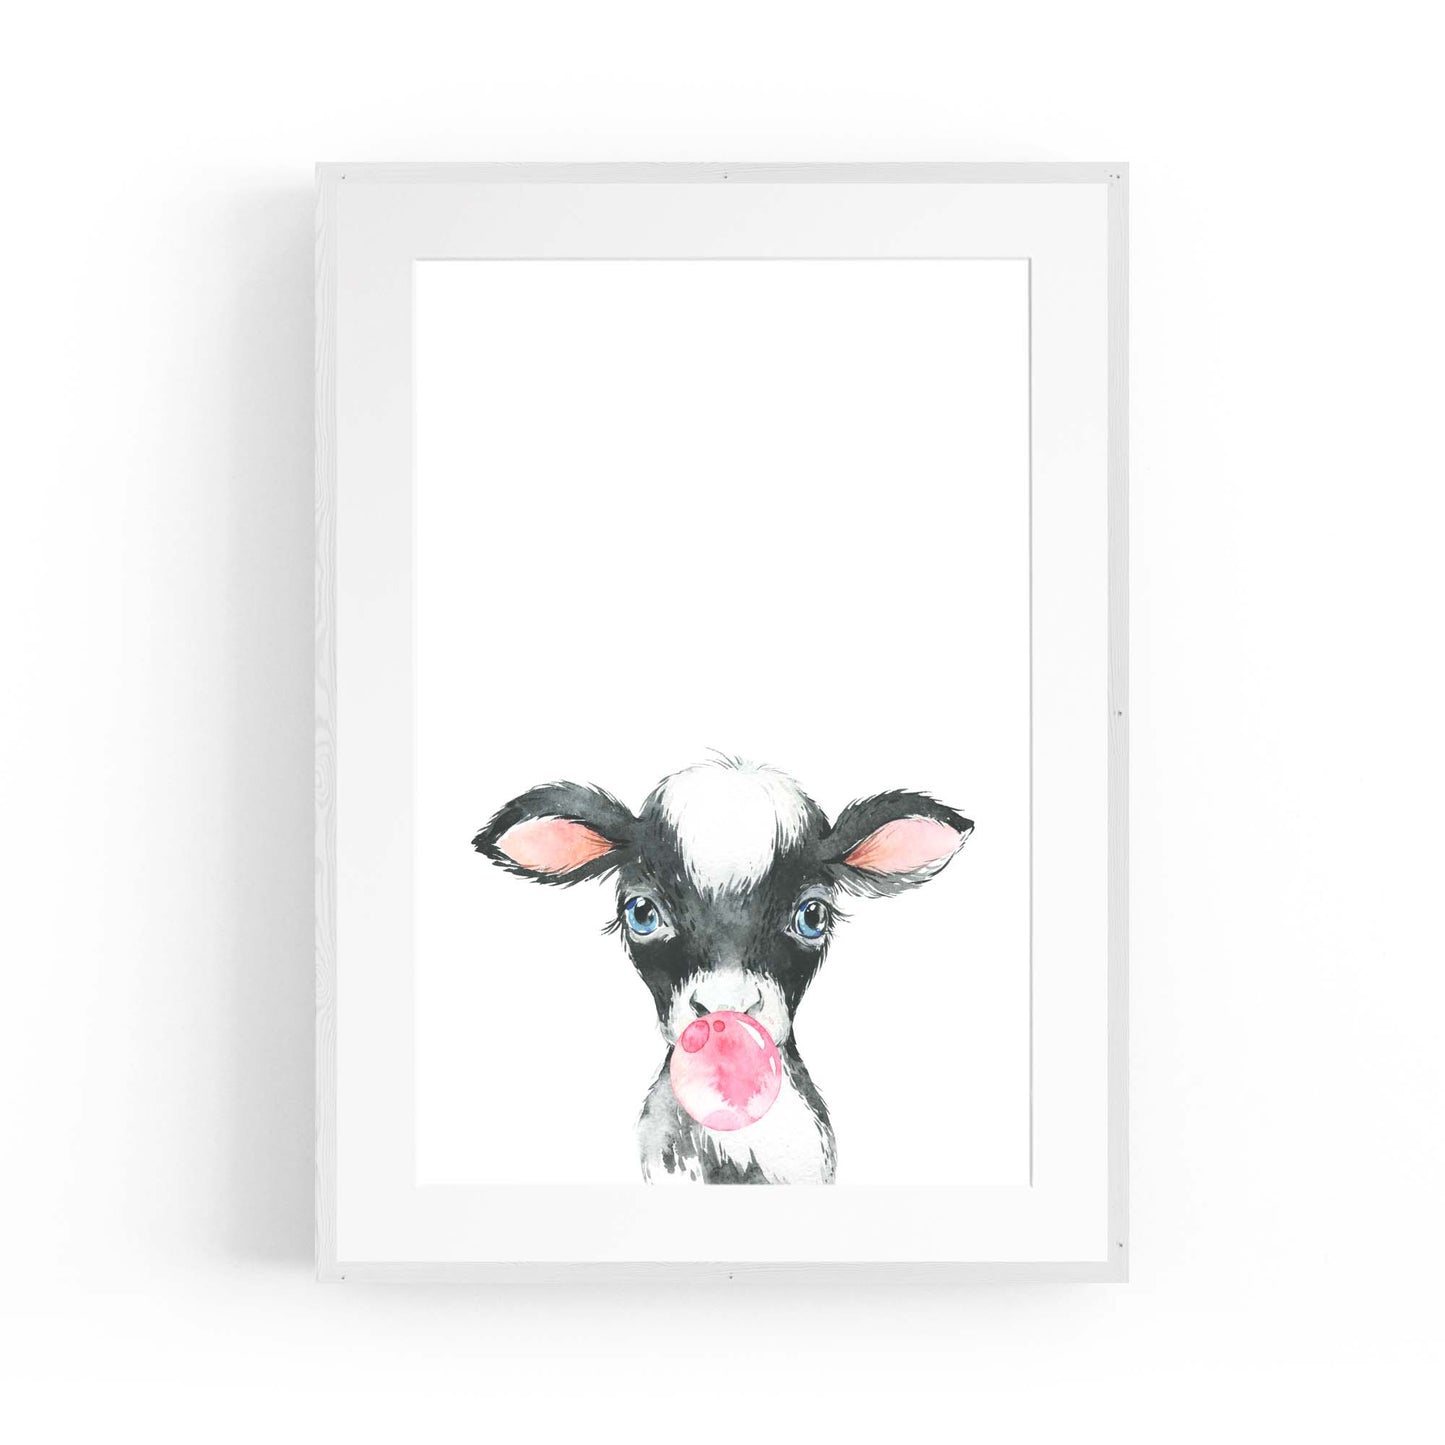 Cute Baby Cow Nursery Animal Gift Wall Art #3 - The Affordable Art Company